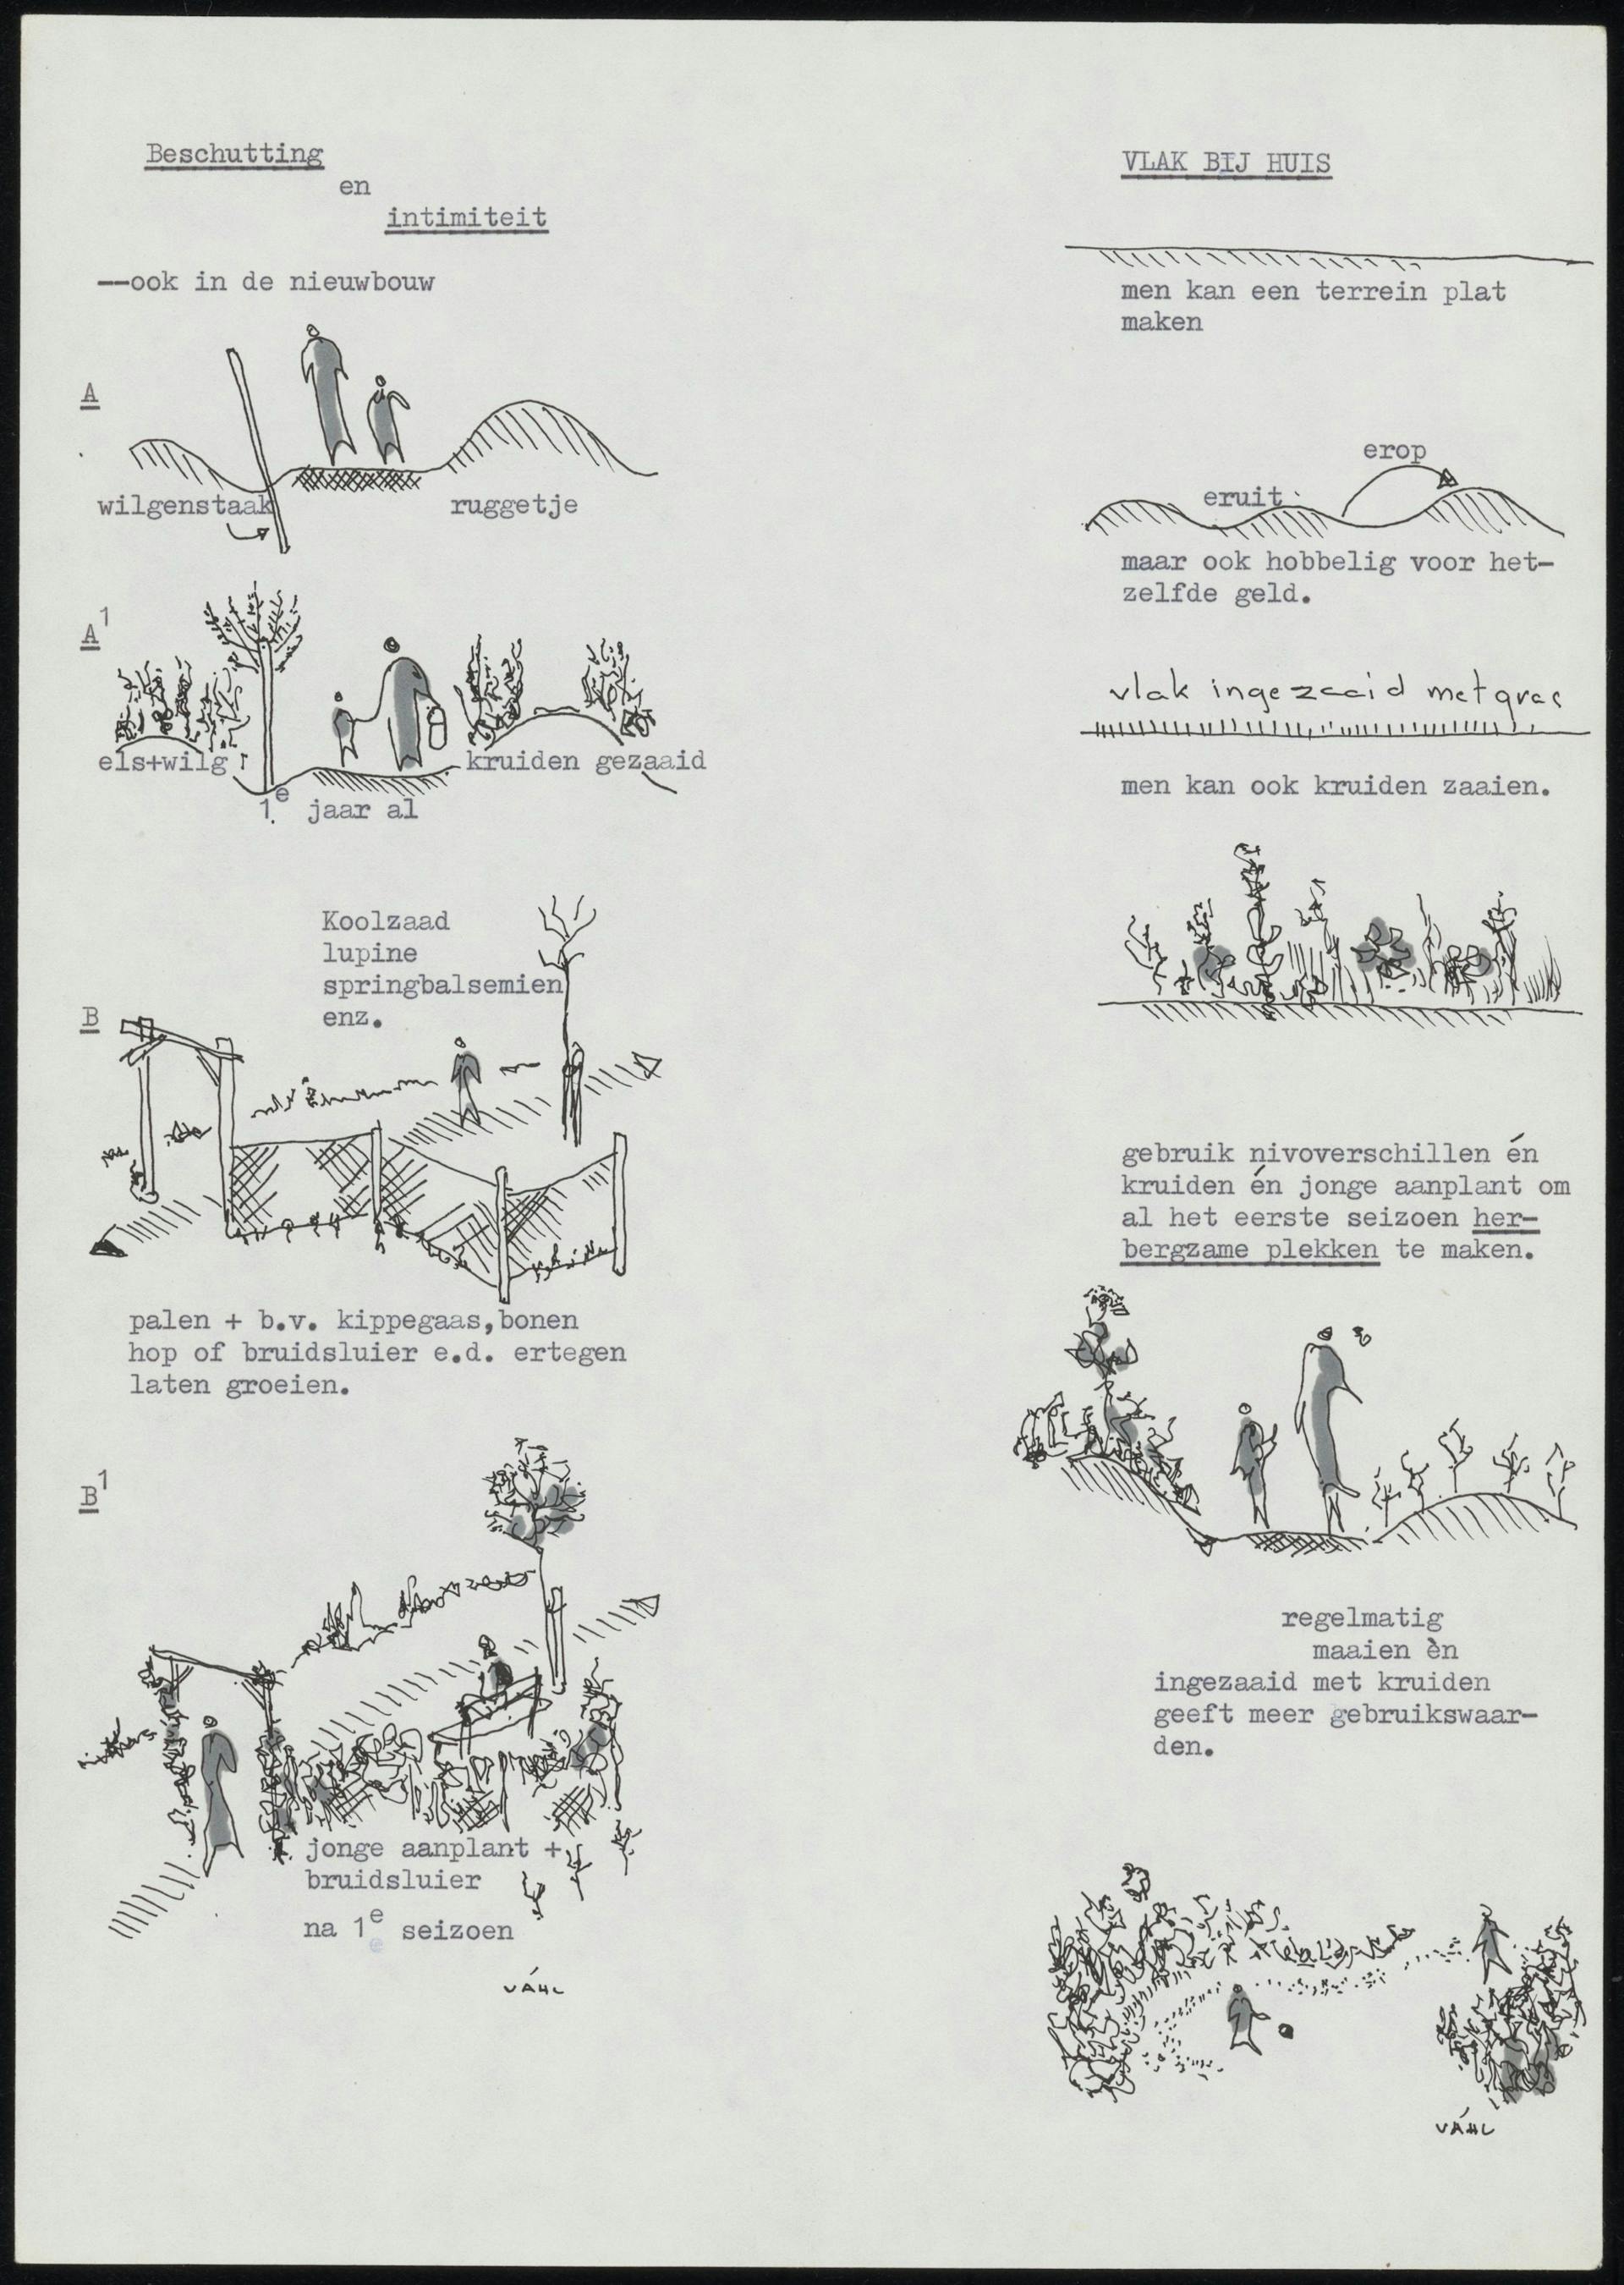 Joost Váhl, various notes and sketches on the relationship between city and nature, dwelling and planting, vegetation and the experience of waterfronts, 1970-72. Collection Het Nieuwe Instituut, VAHL 39 